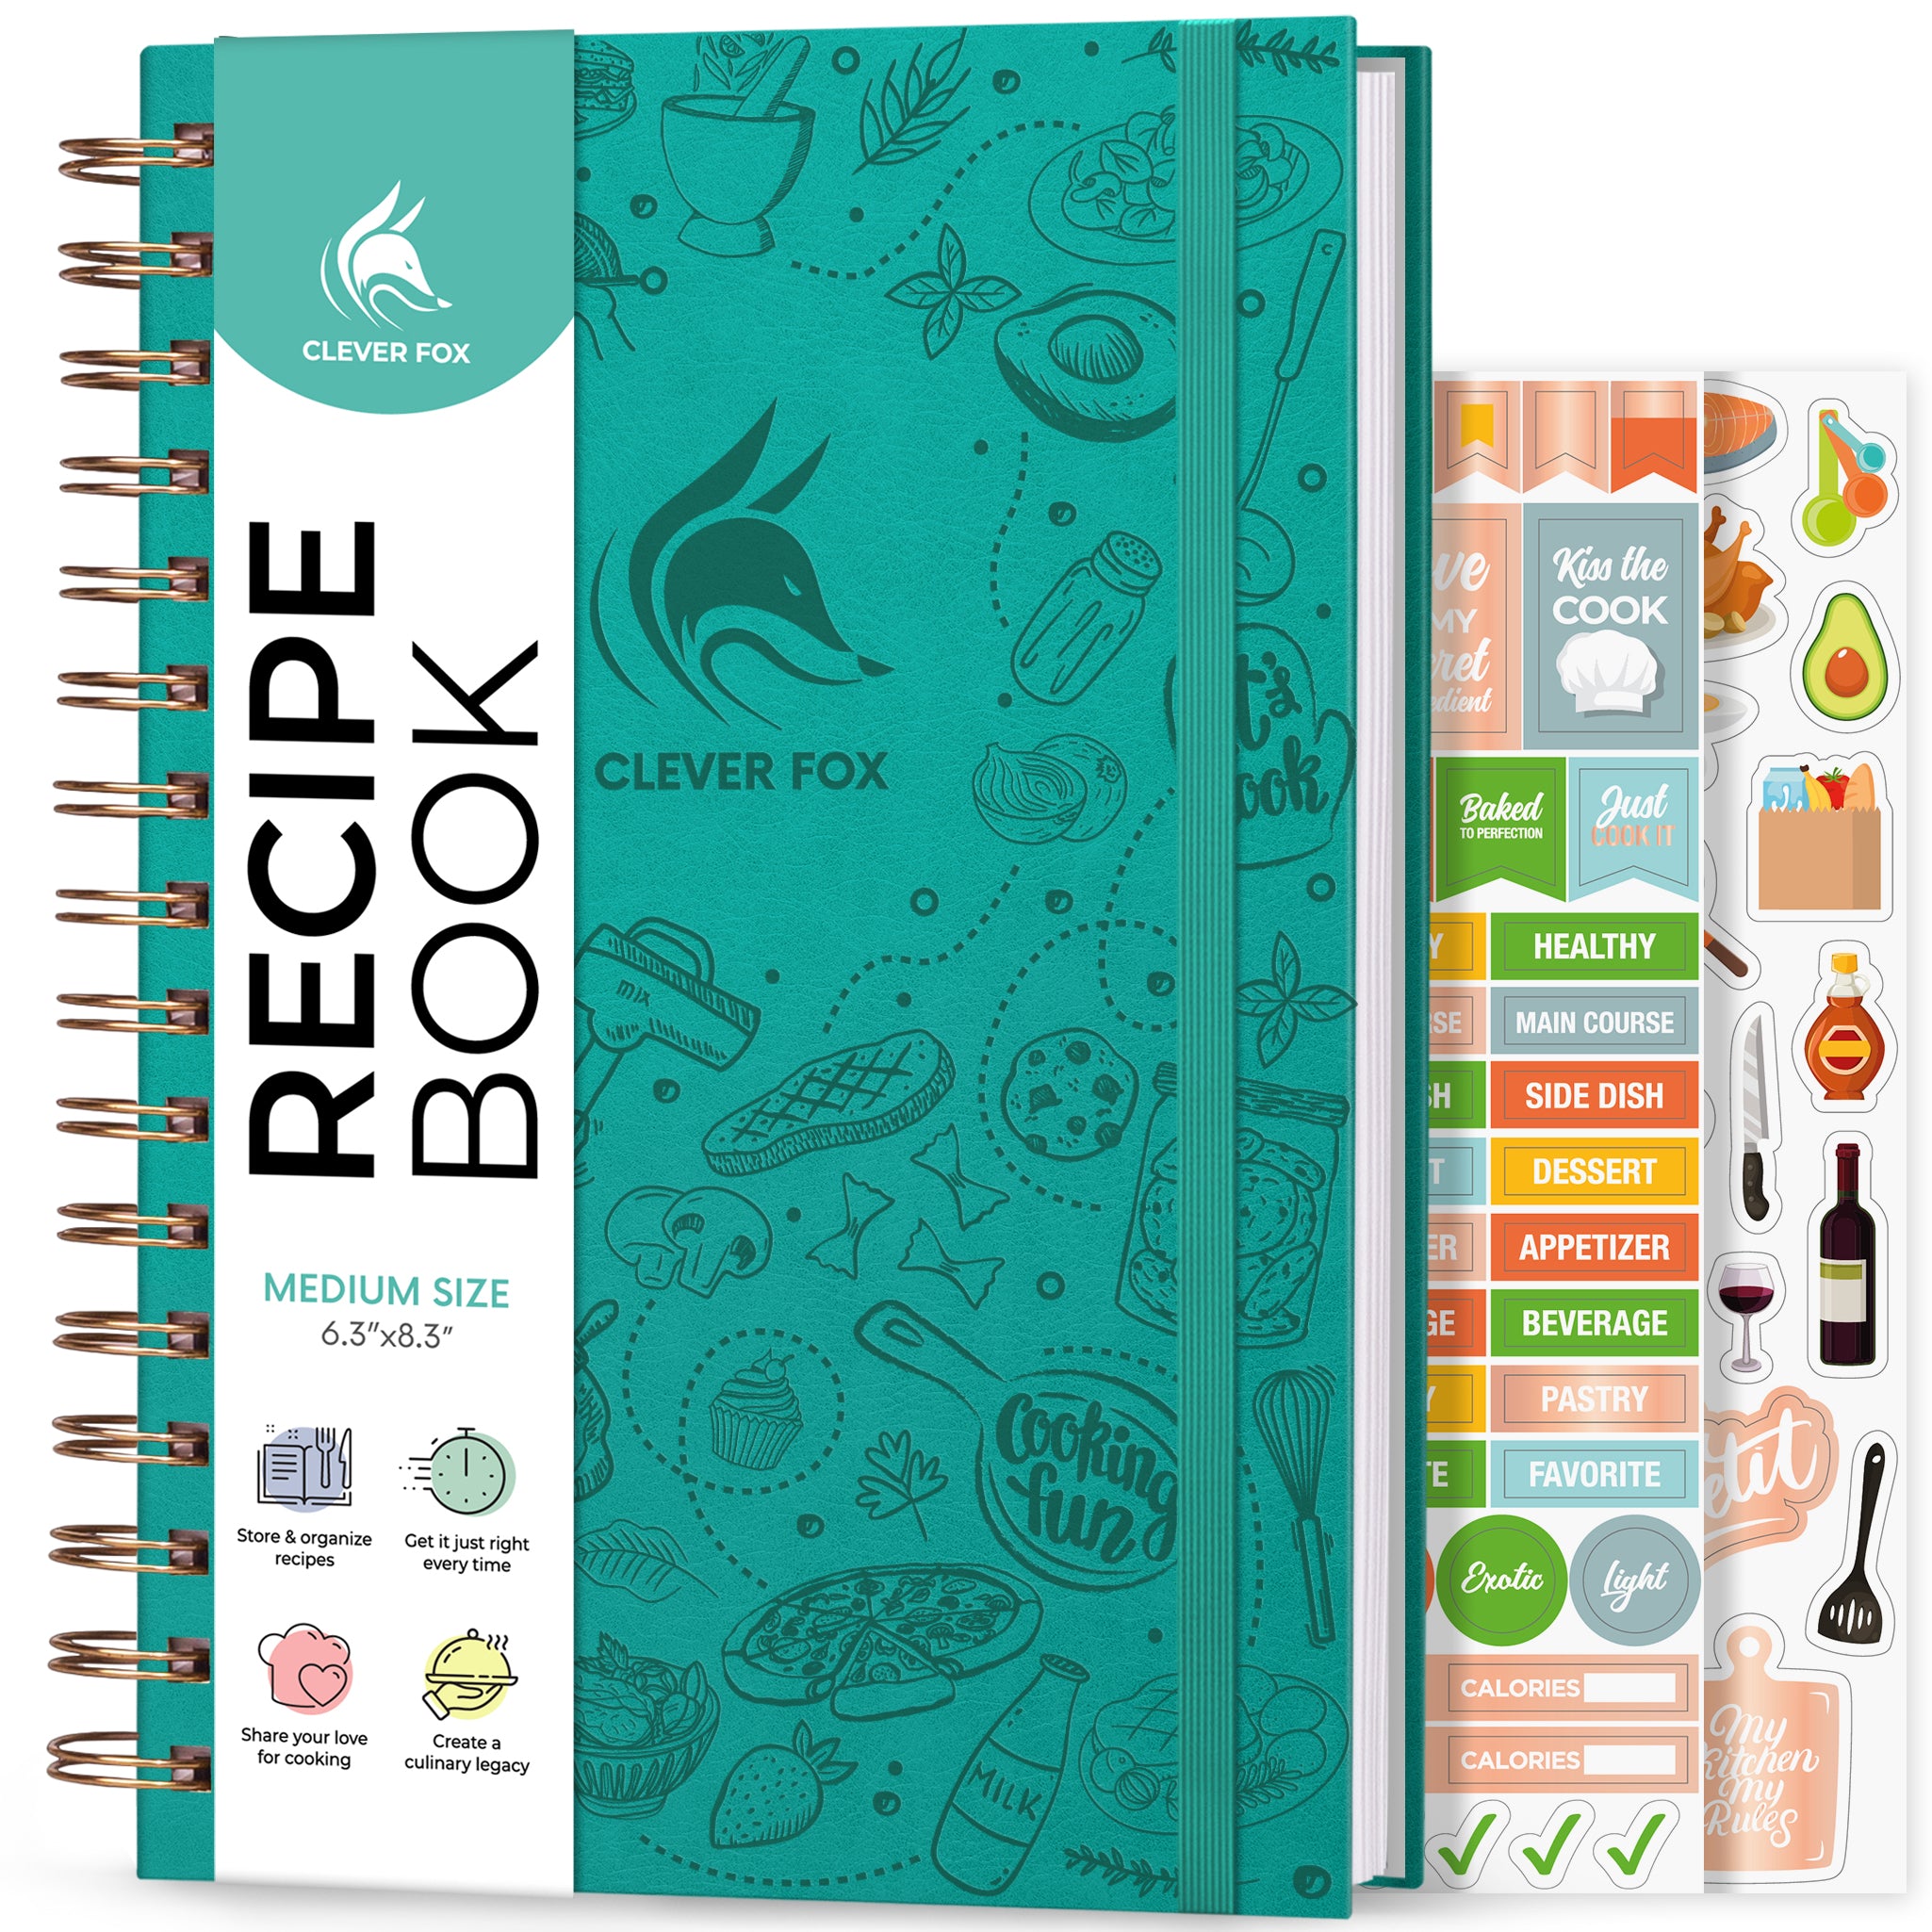 Recipe Book To Write In Your Own Recipes - Blank Family Cook Book Journal  to Create Your Own DIY 100 Page Cookbook - Spiral Bound Recipe Organizer 